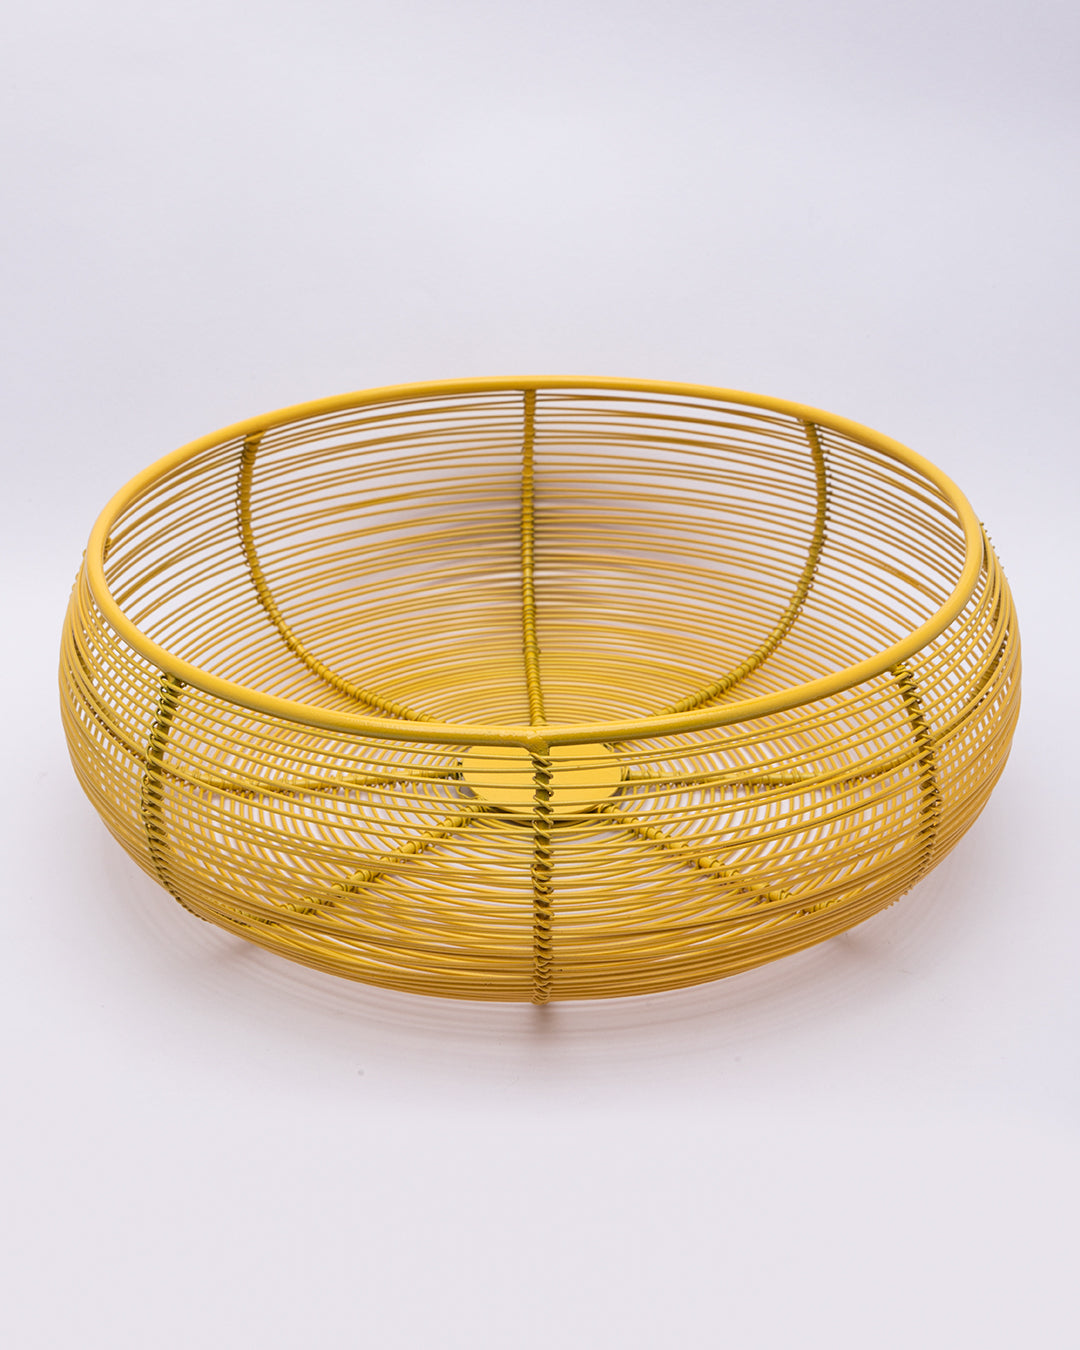 VON CASA Metal Wire Countertop Fruit Bowl, Basket Holder Stand, For Home & Kitchen, Yellow Colour, Iron